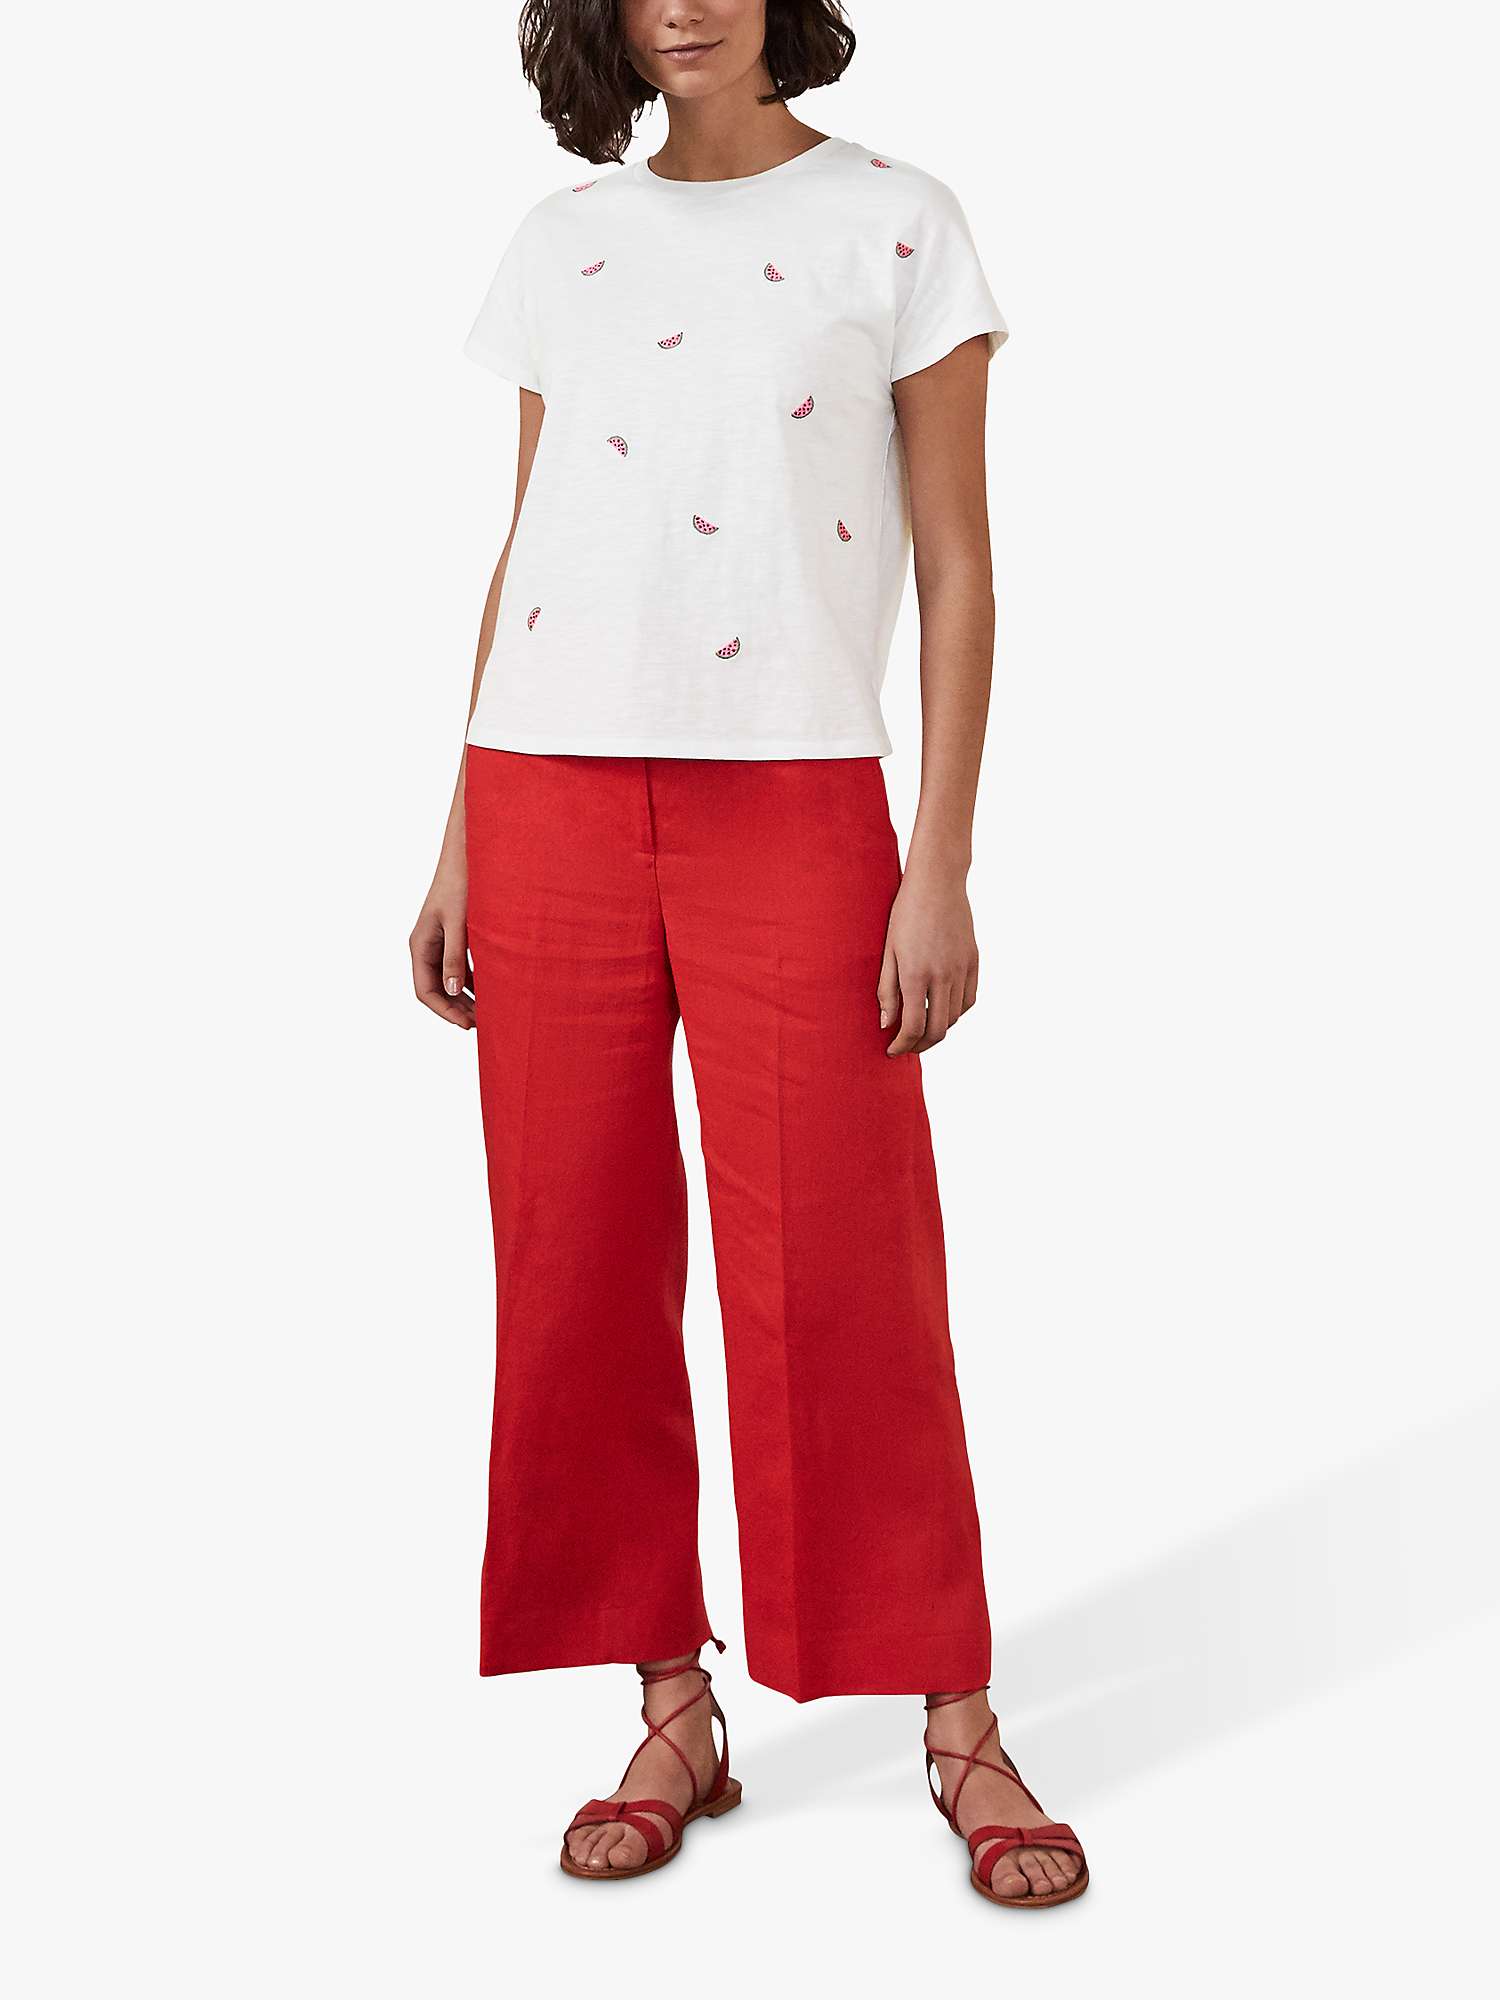 Boden Lena Embroidered Watermelon T-Shirt, White at John Lewis & Partners